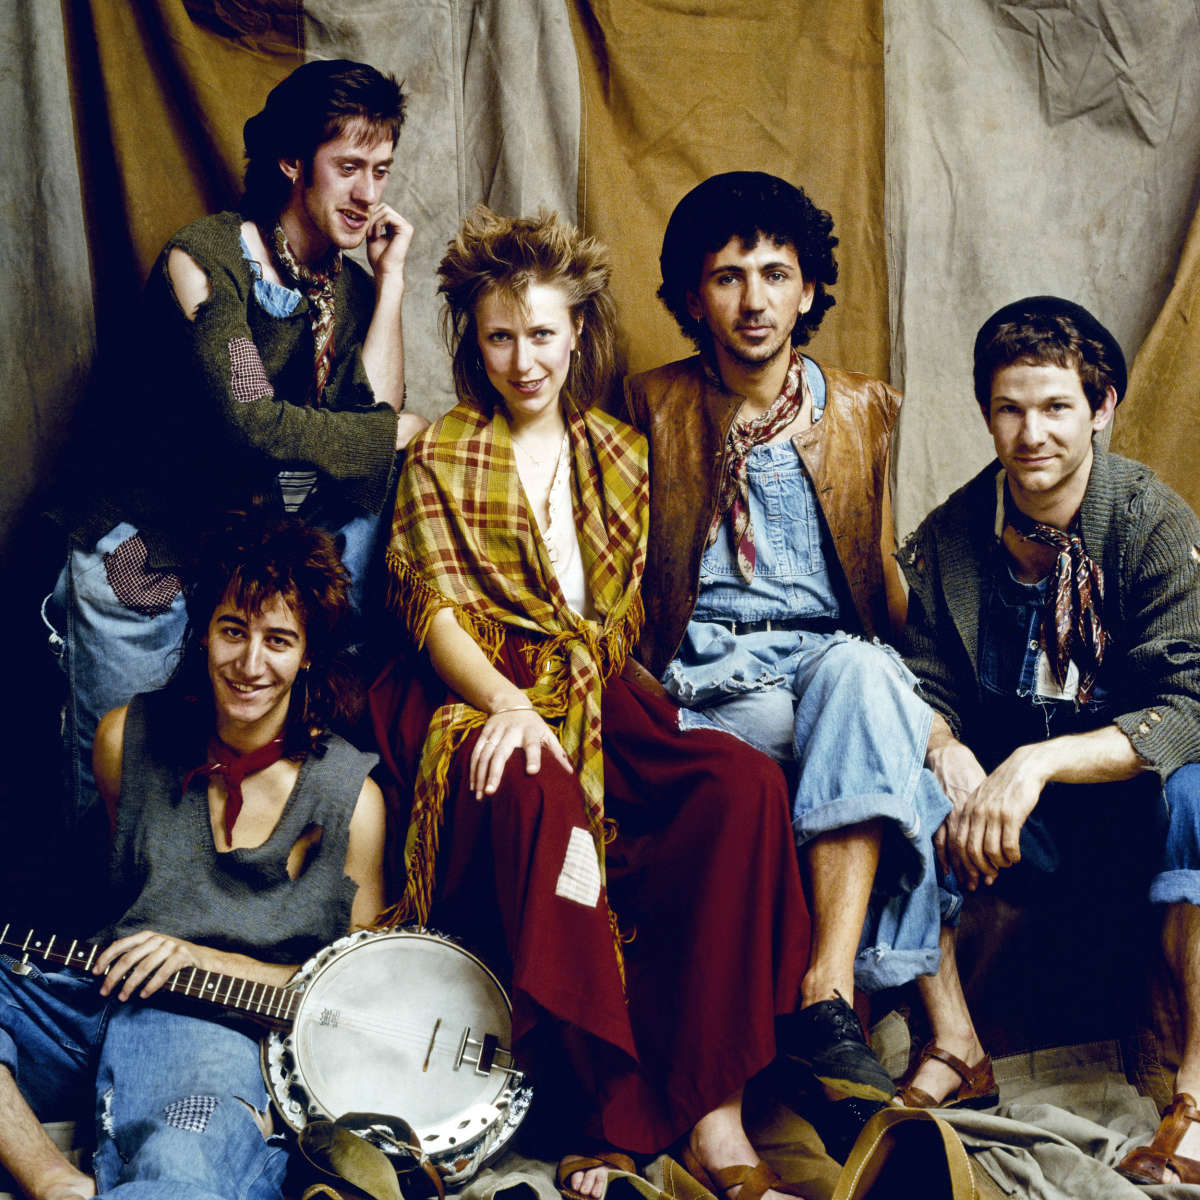 Kevin Rowland et son groupe quand sort « Too-Rye-Ay », en 1982.